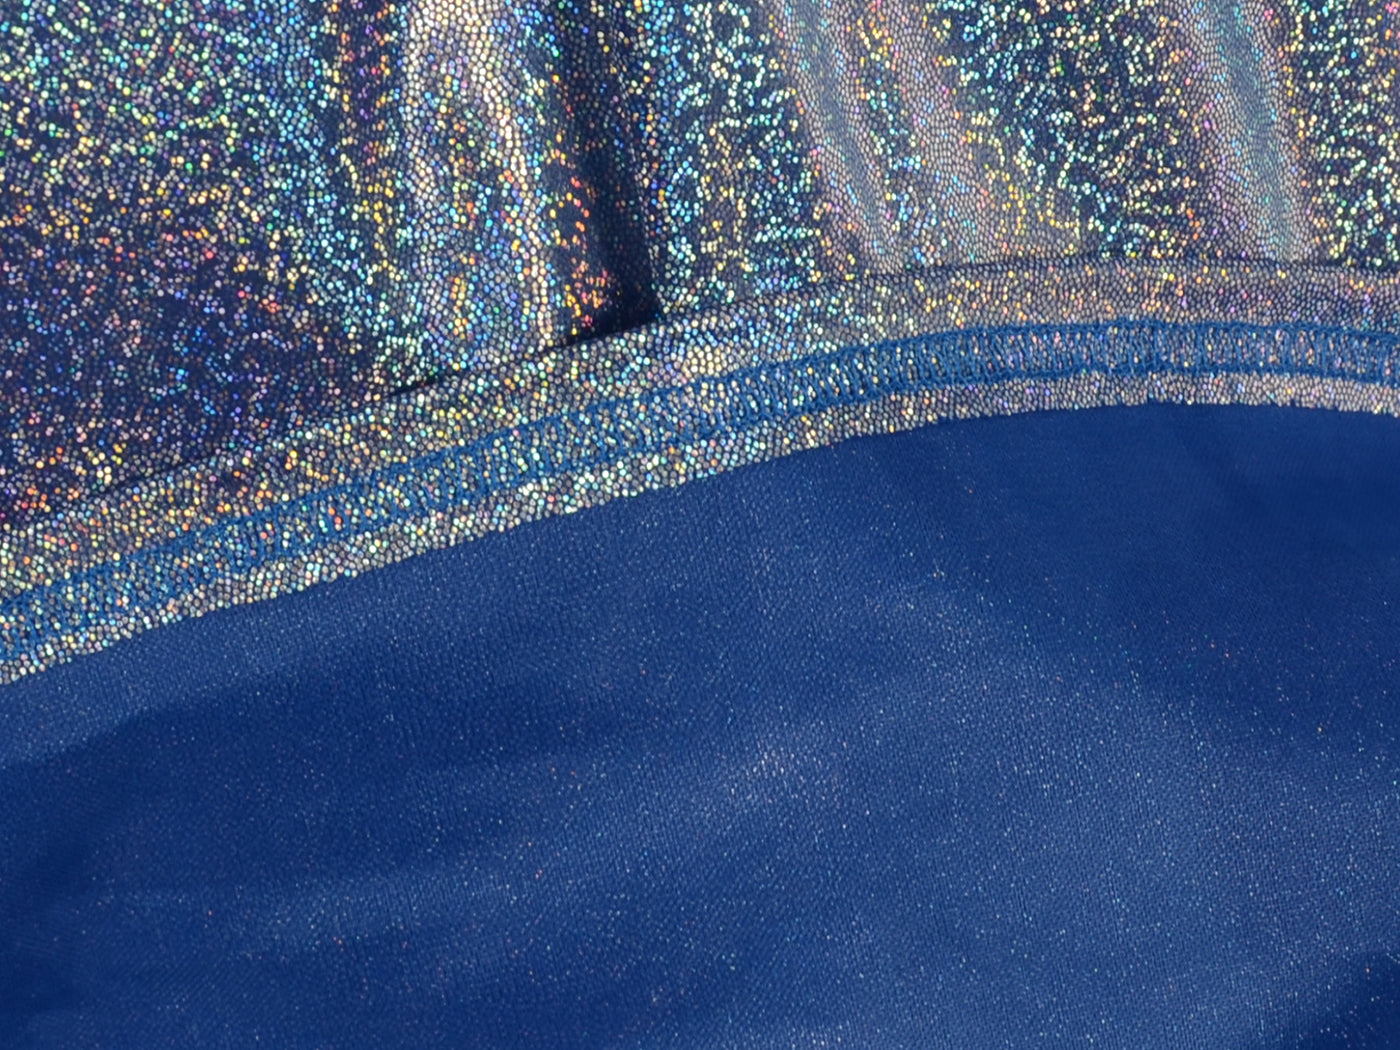 Holographic Disco Party Top Blouse